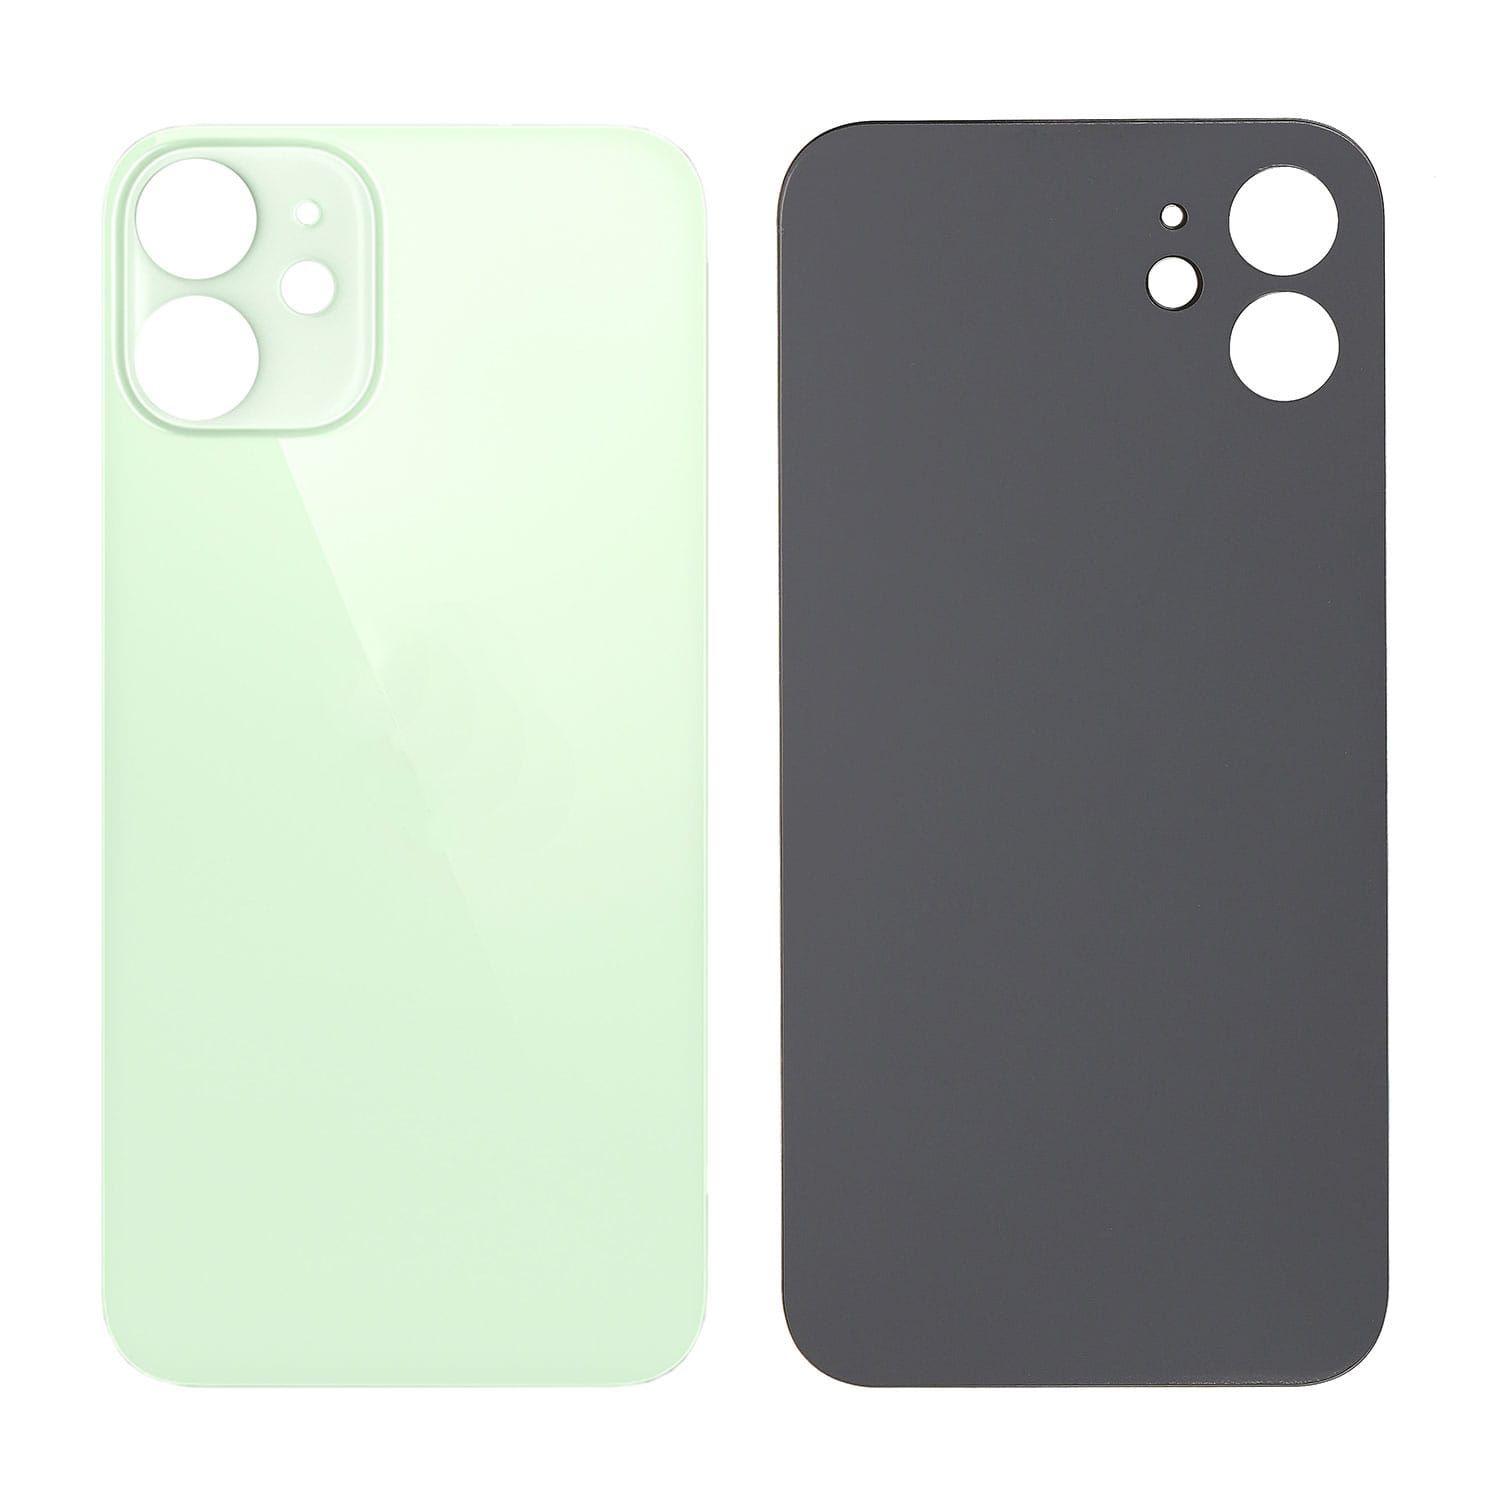 Battery cover iPhone 12 with bigger hole for camera glass - green